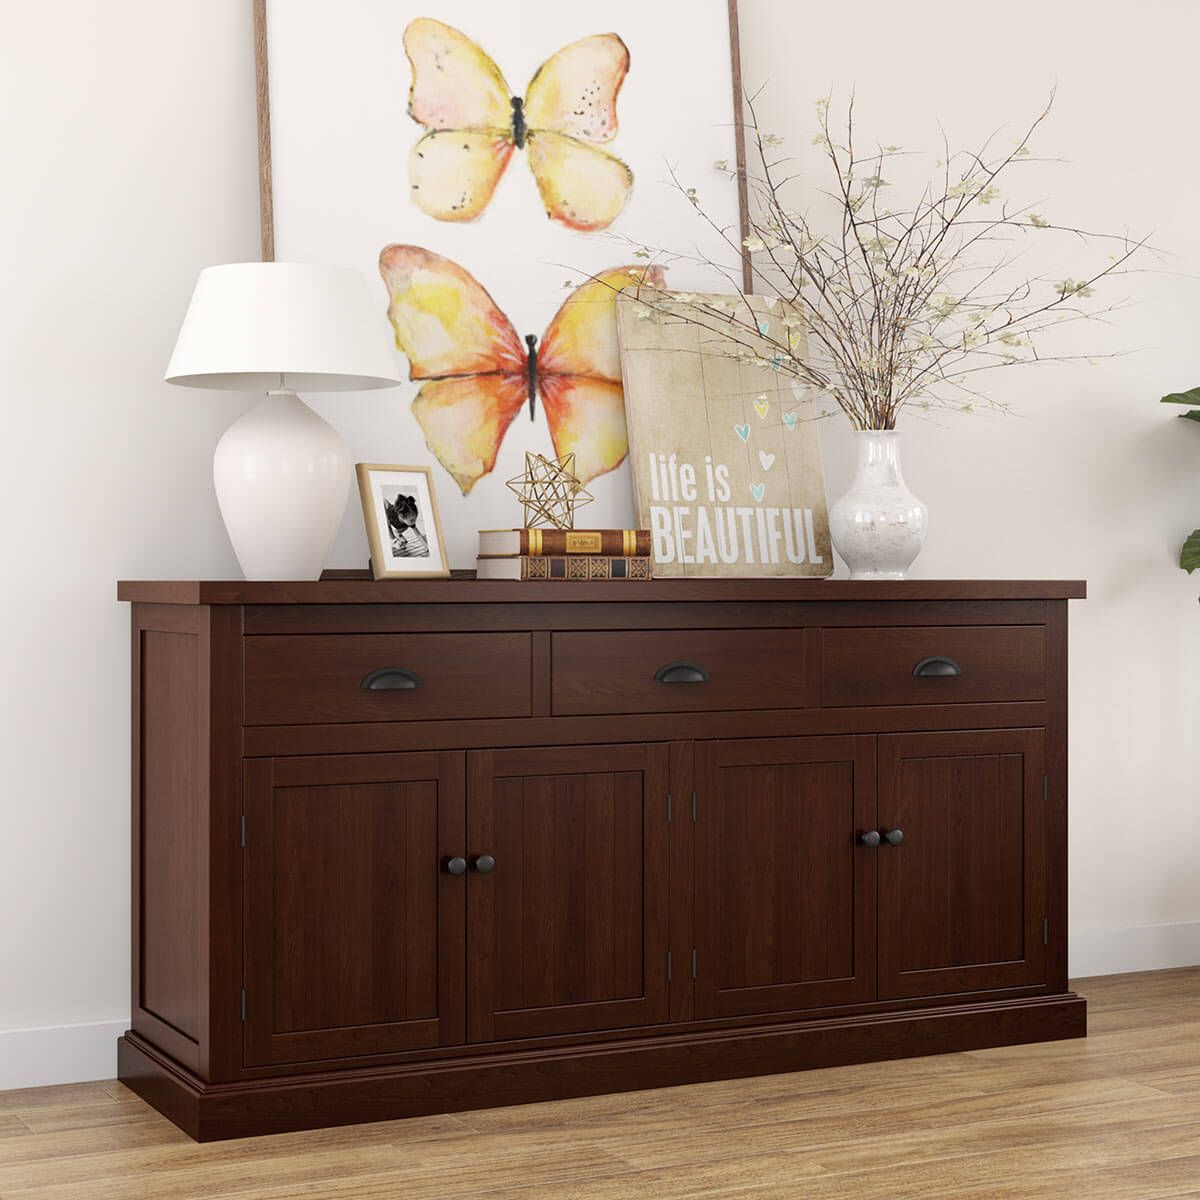 Tannersville Solid Mahogany Wood 3 Drawer Large Sideboard Cabinet Intended For Most Popular 3 Drawers Sideboards Storage Cabinet (View 10 of 15)